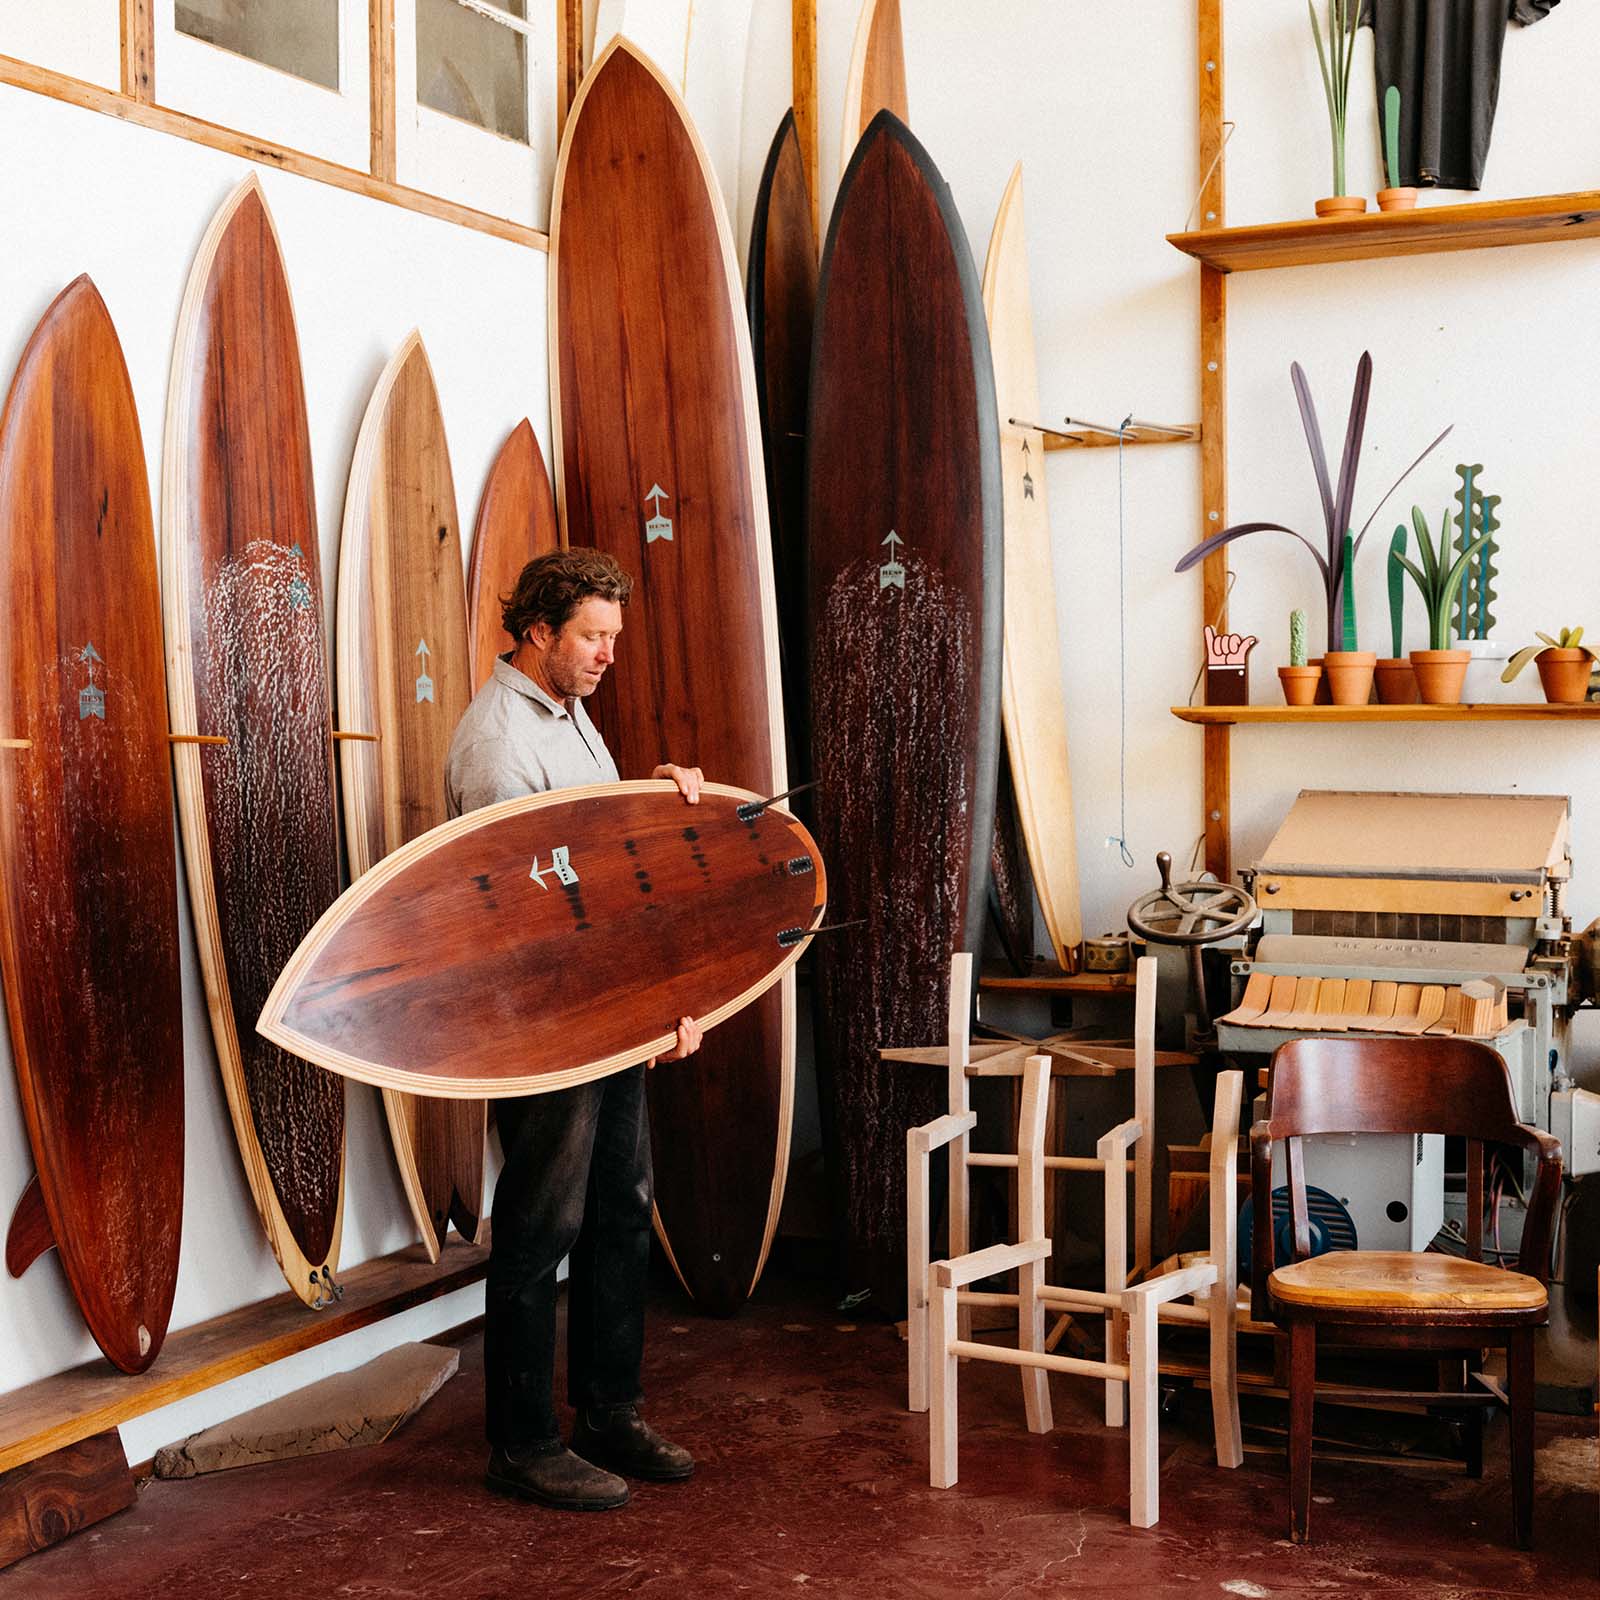 Making waves with custom surfboards